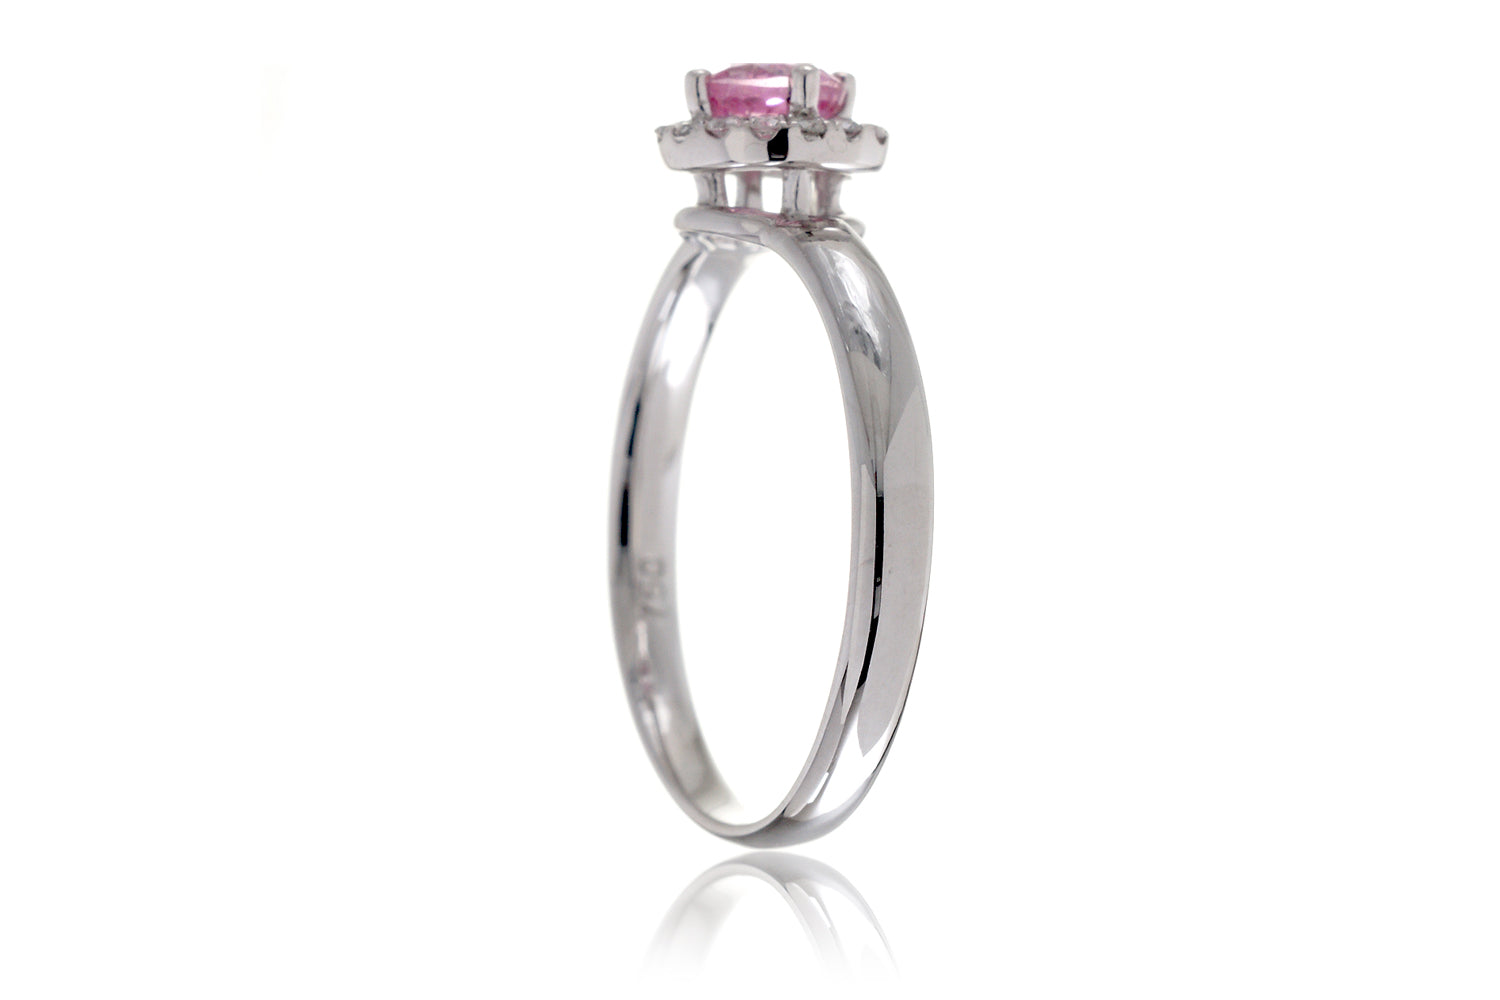 The Lanelle Round Pink Sapphire (4mm)